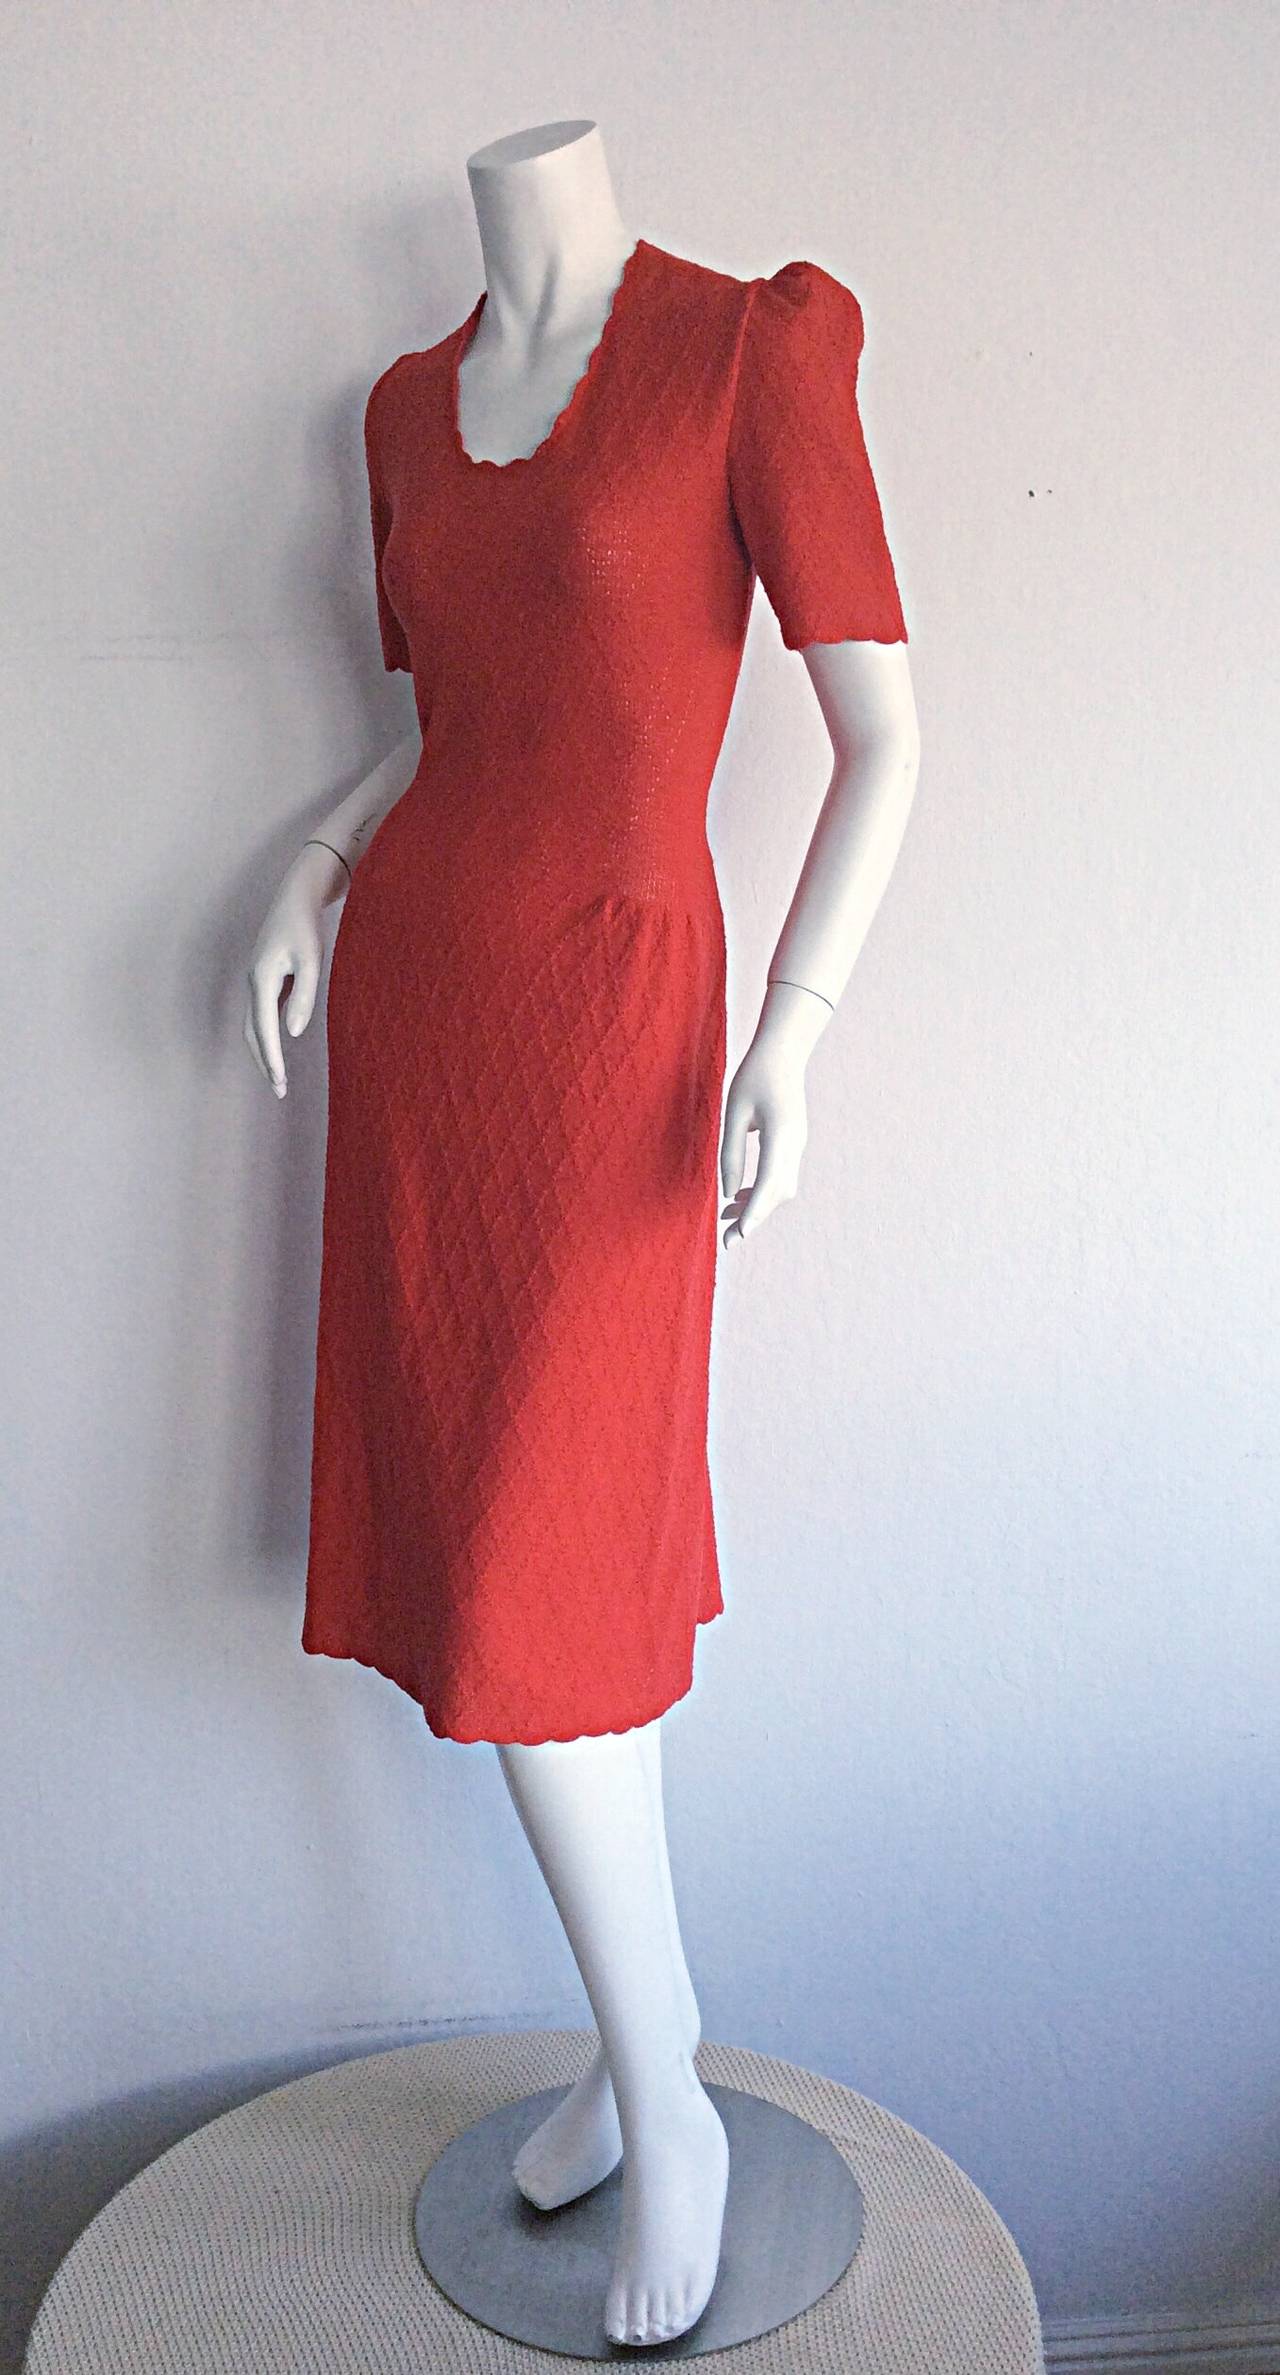 Women's 1960s Vintage Adolfo for Saks 5th Ave. Knit 60s Dress Lipstick Red For Sale